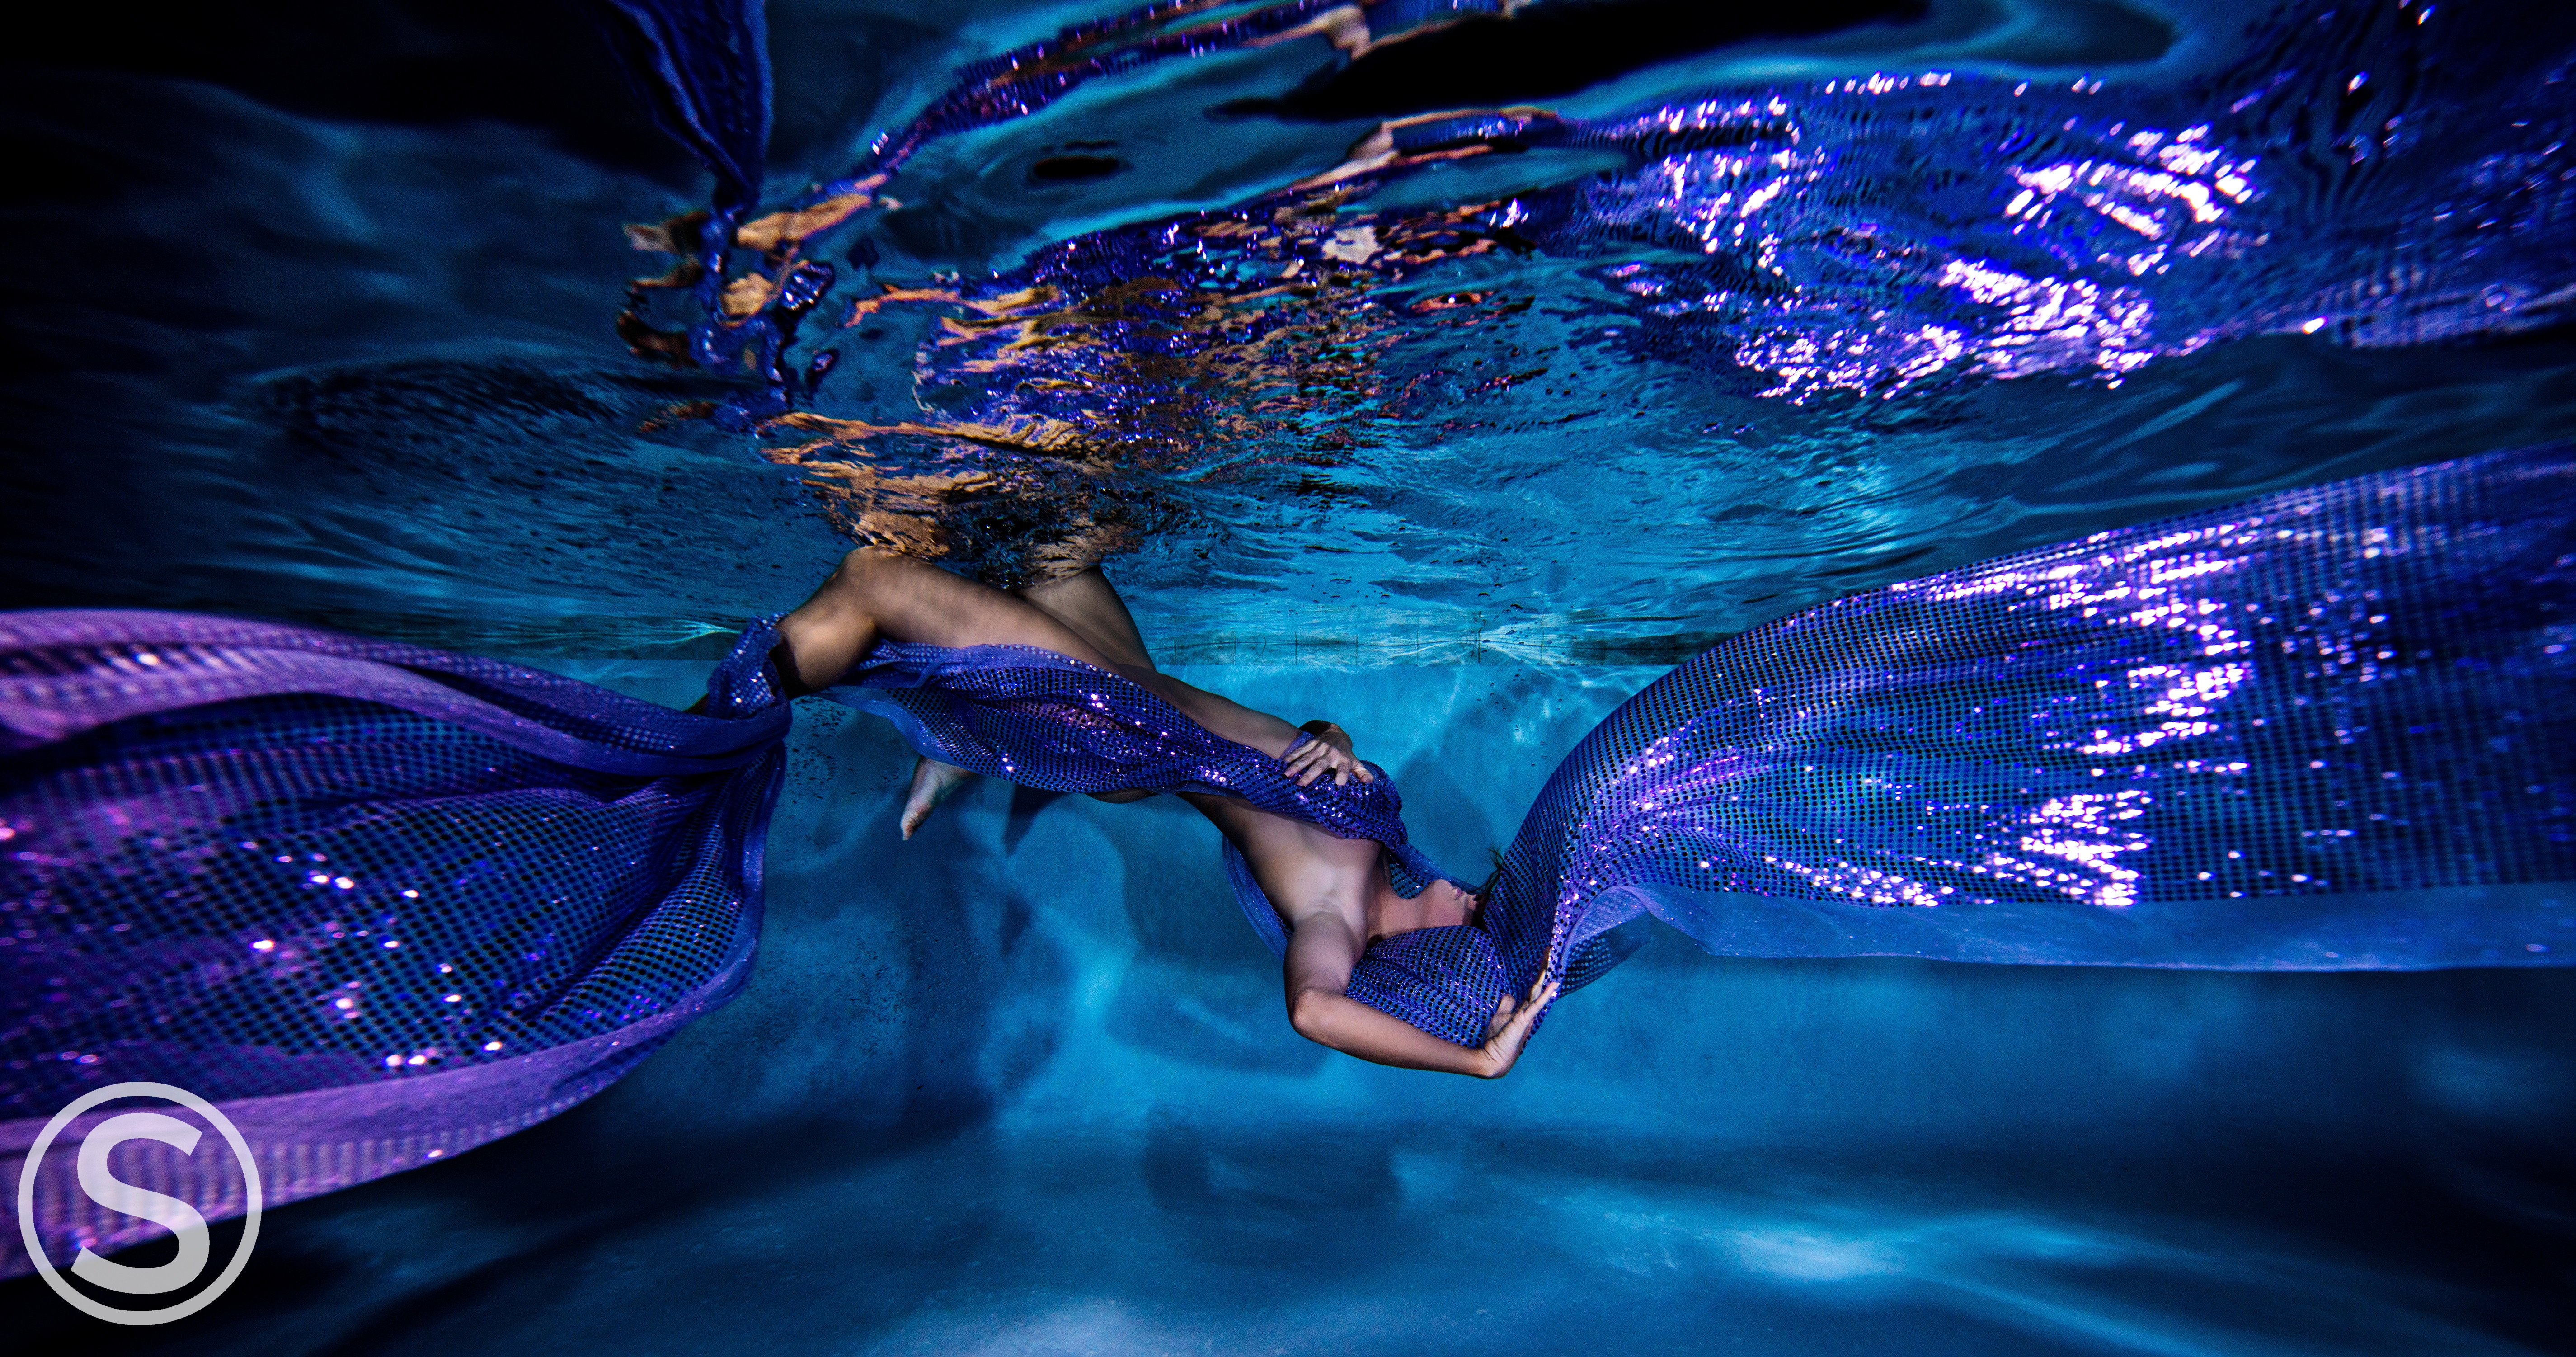 Fashion Photography Woman Under Water in Ultra Violet Sequin